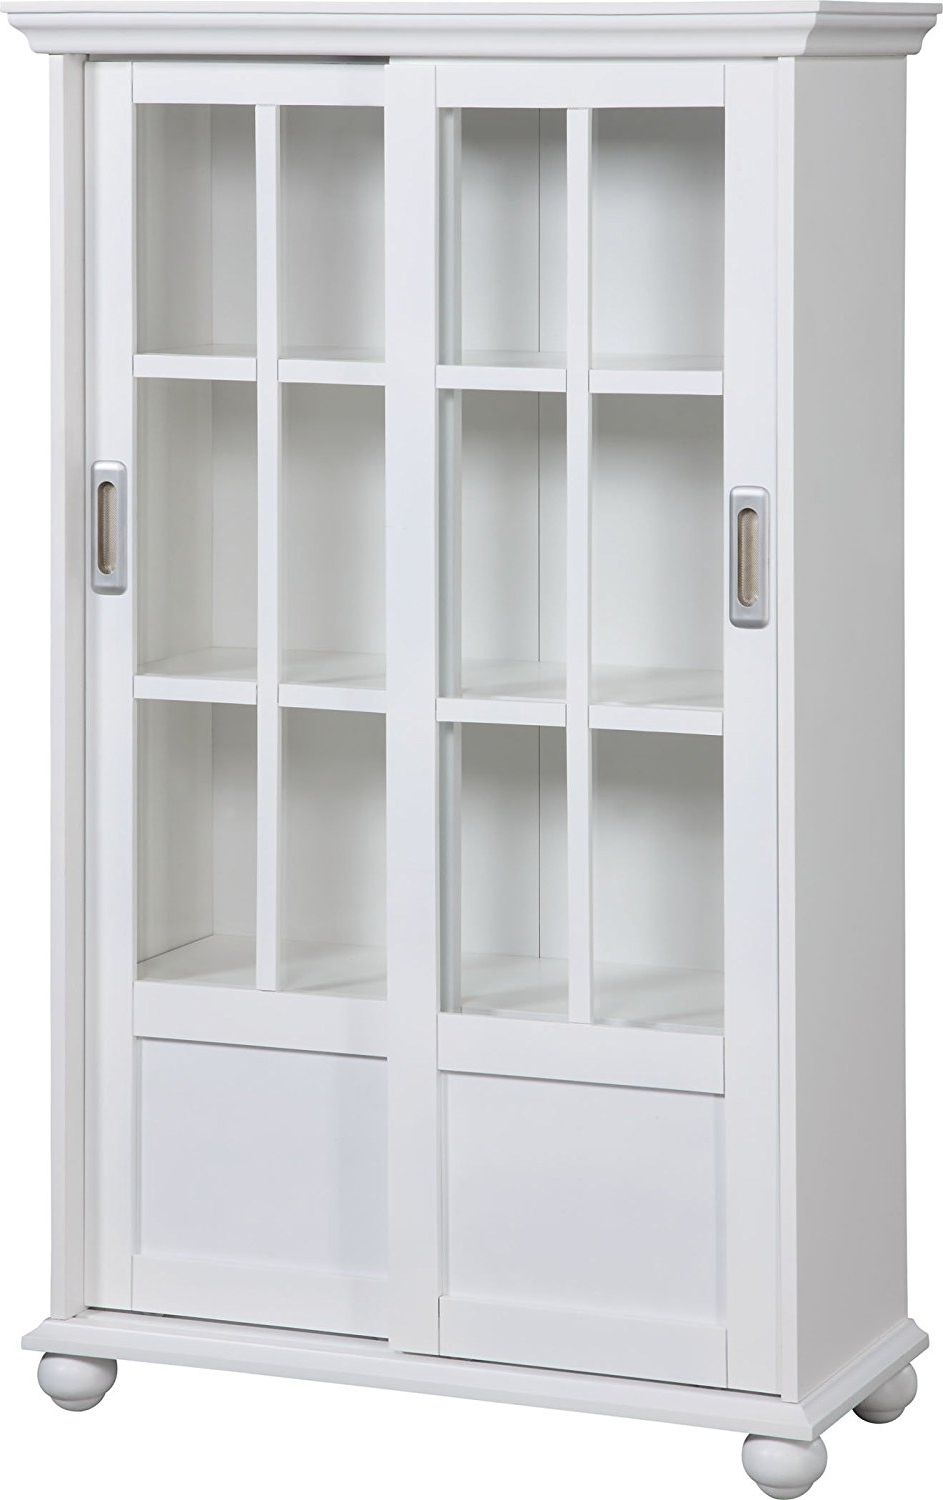 Black Bookcases With Doors Intended For Favorite Amazon: Altra 9448096 Bookcase With Sliding Glass Doors, White (View 15 of 15)